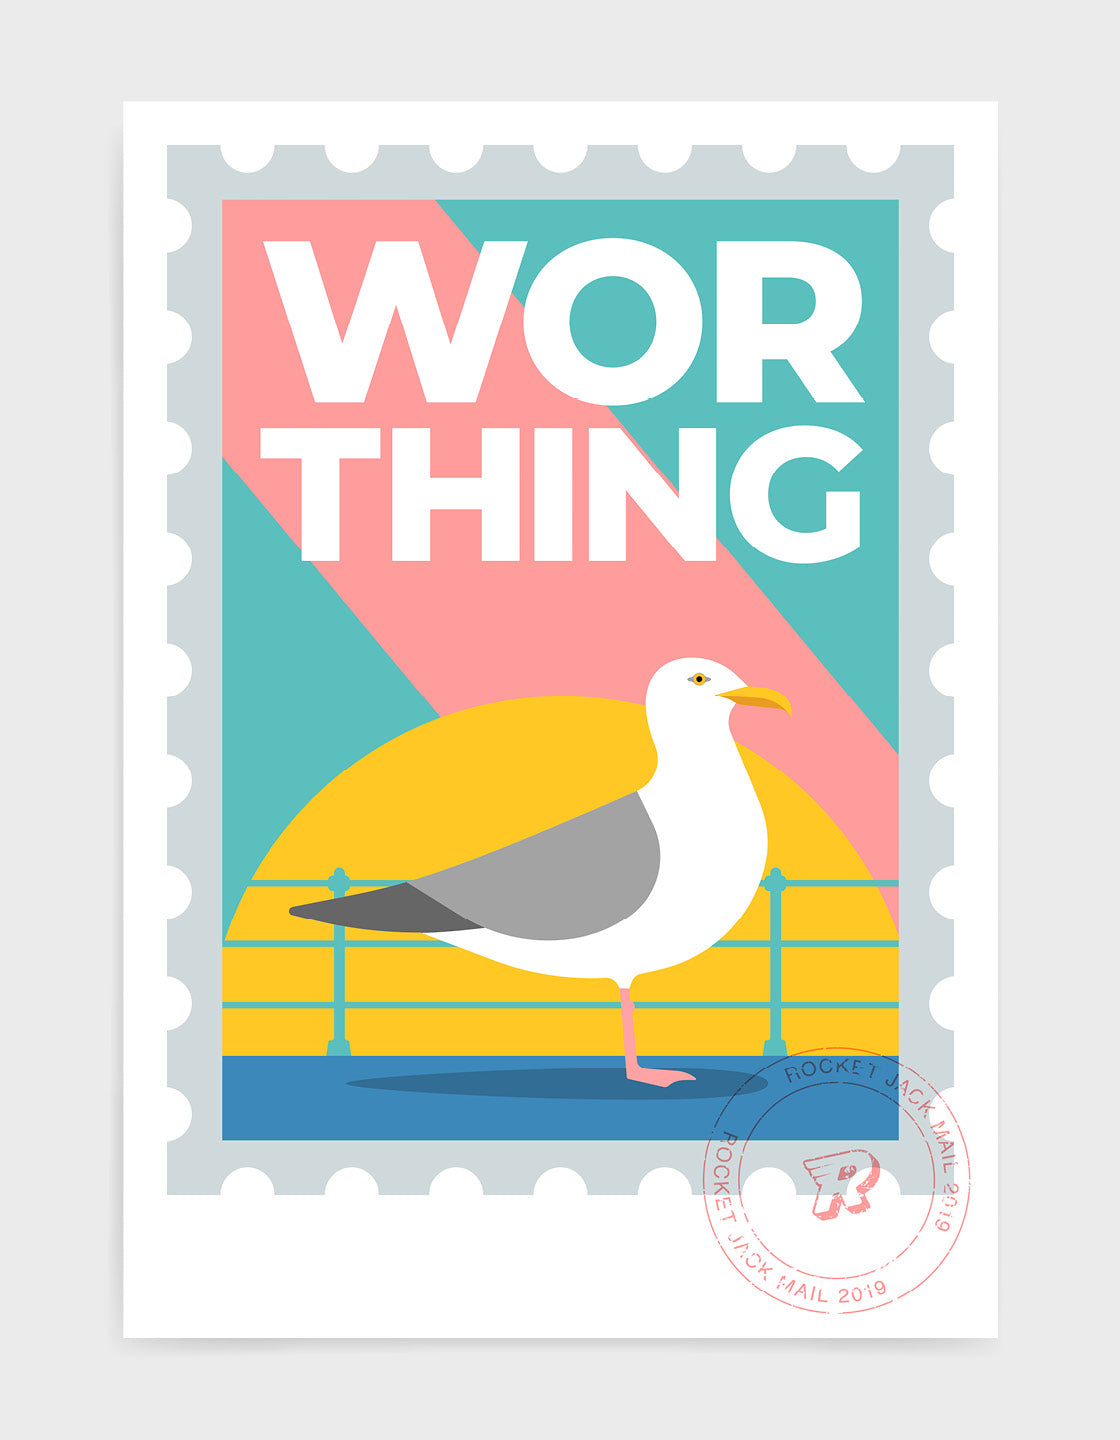 Worthing travel print in the style of a stamp. Features a seagull and promenade railing with bold Worthing text on a bright background